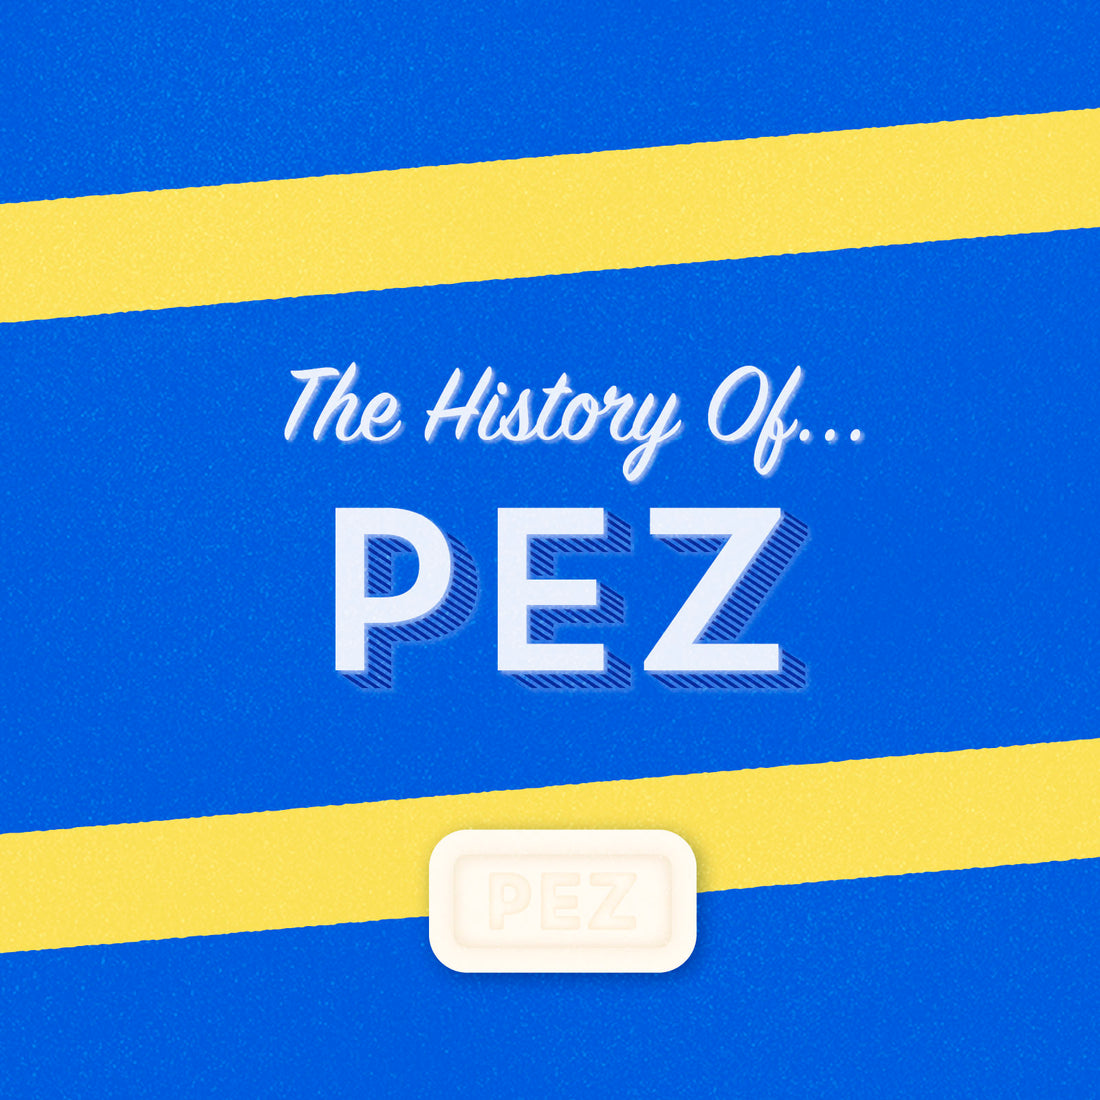 How Pez Dispensers Became An American Candy Icon